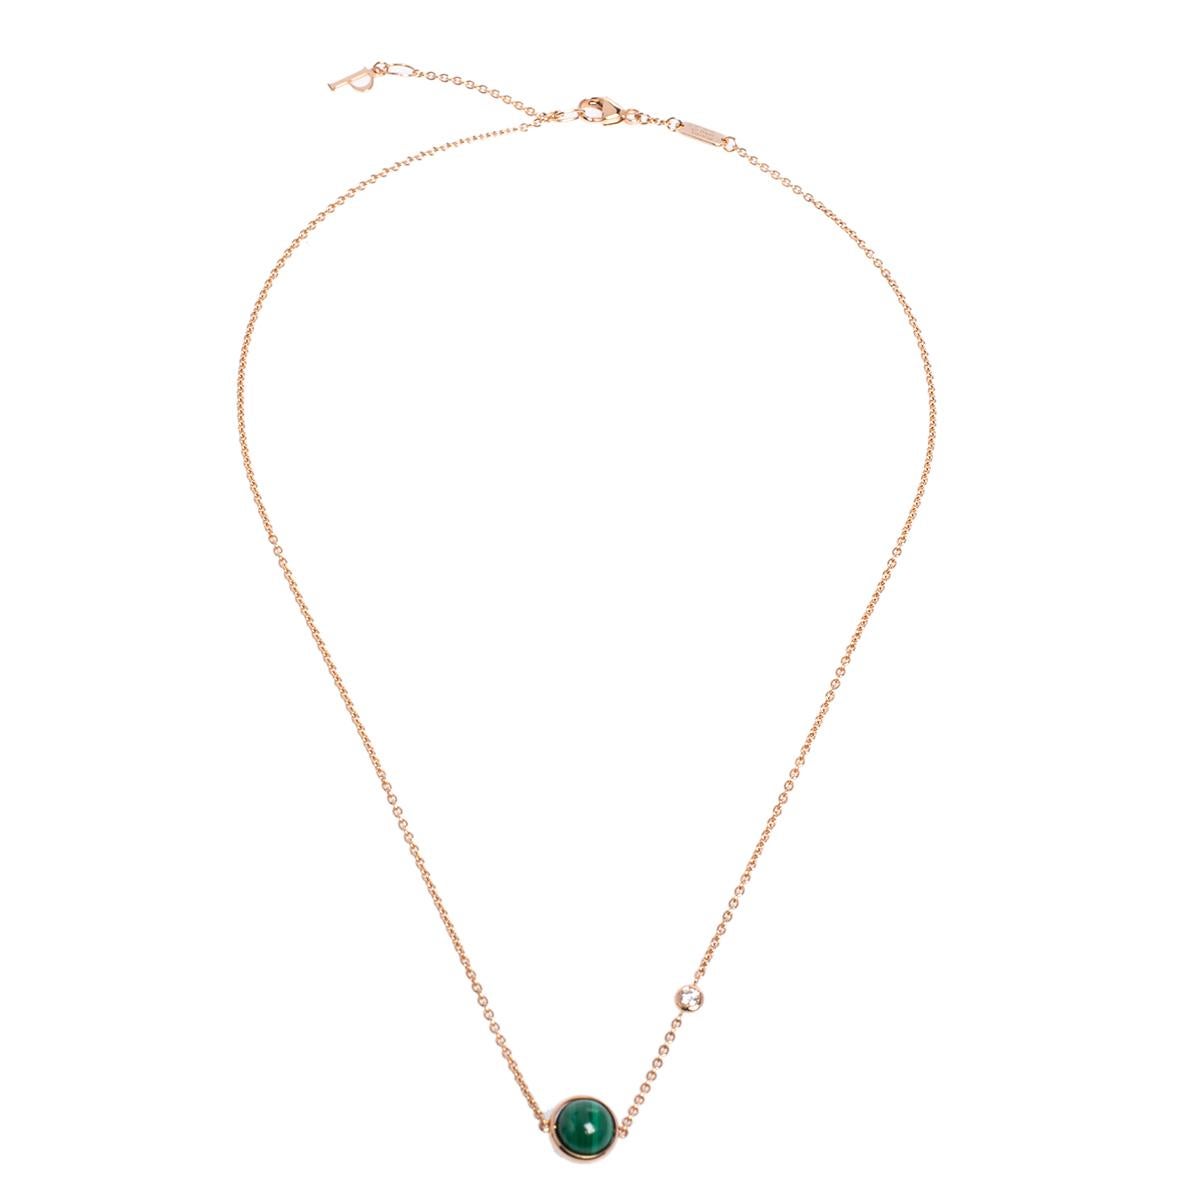 This charming Piaget Possession necklace celebrates timeless elegance and unmatched grace. Set along an 18K rose gold chain that is decorated with a small diamond and a round malachite charm, this piece will add a touch of radiance to your neckline.